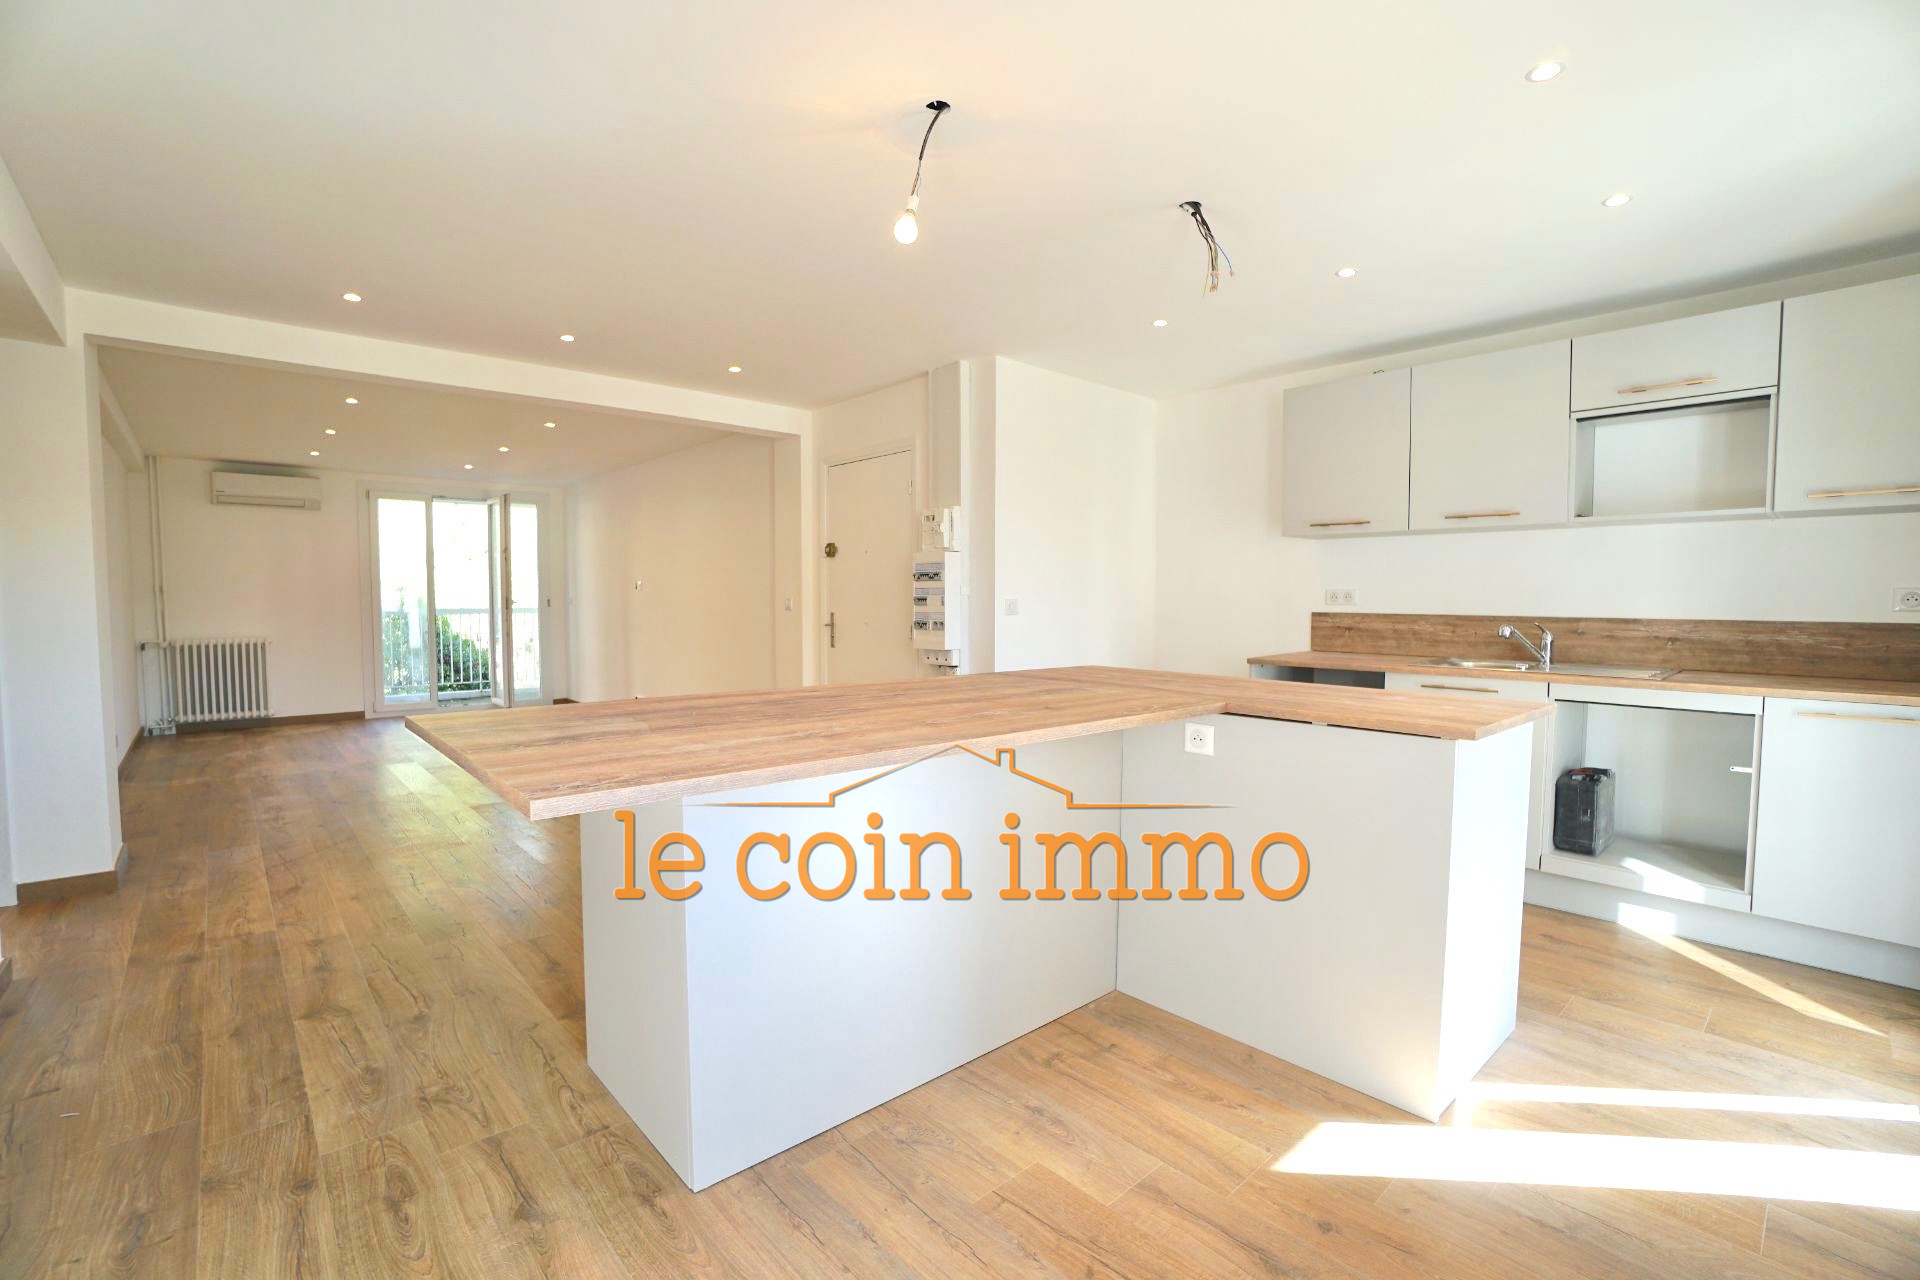 Vente Appartement 80m² à Antibes (06600) - Le Coin Immo